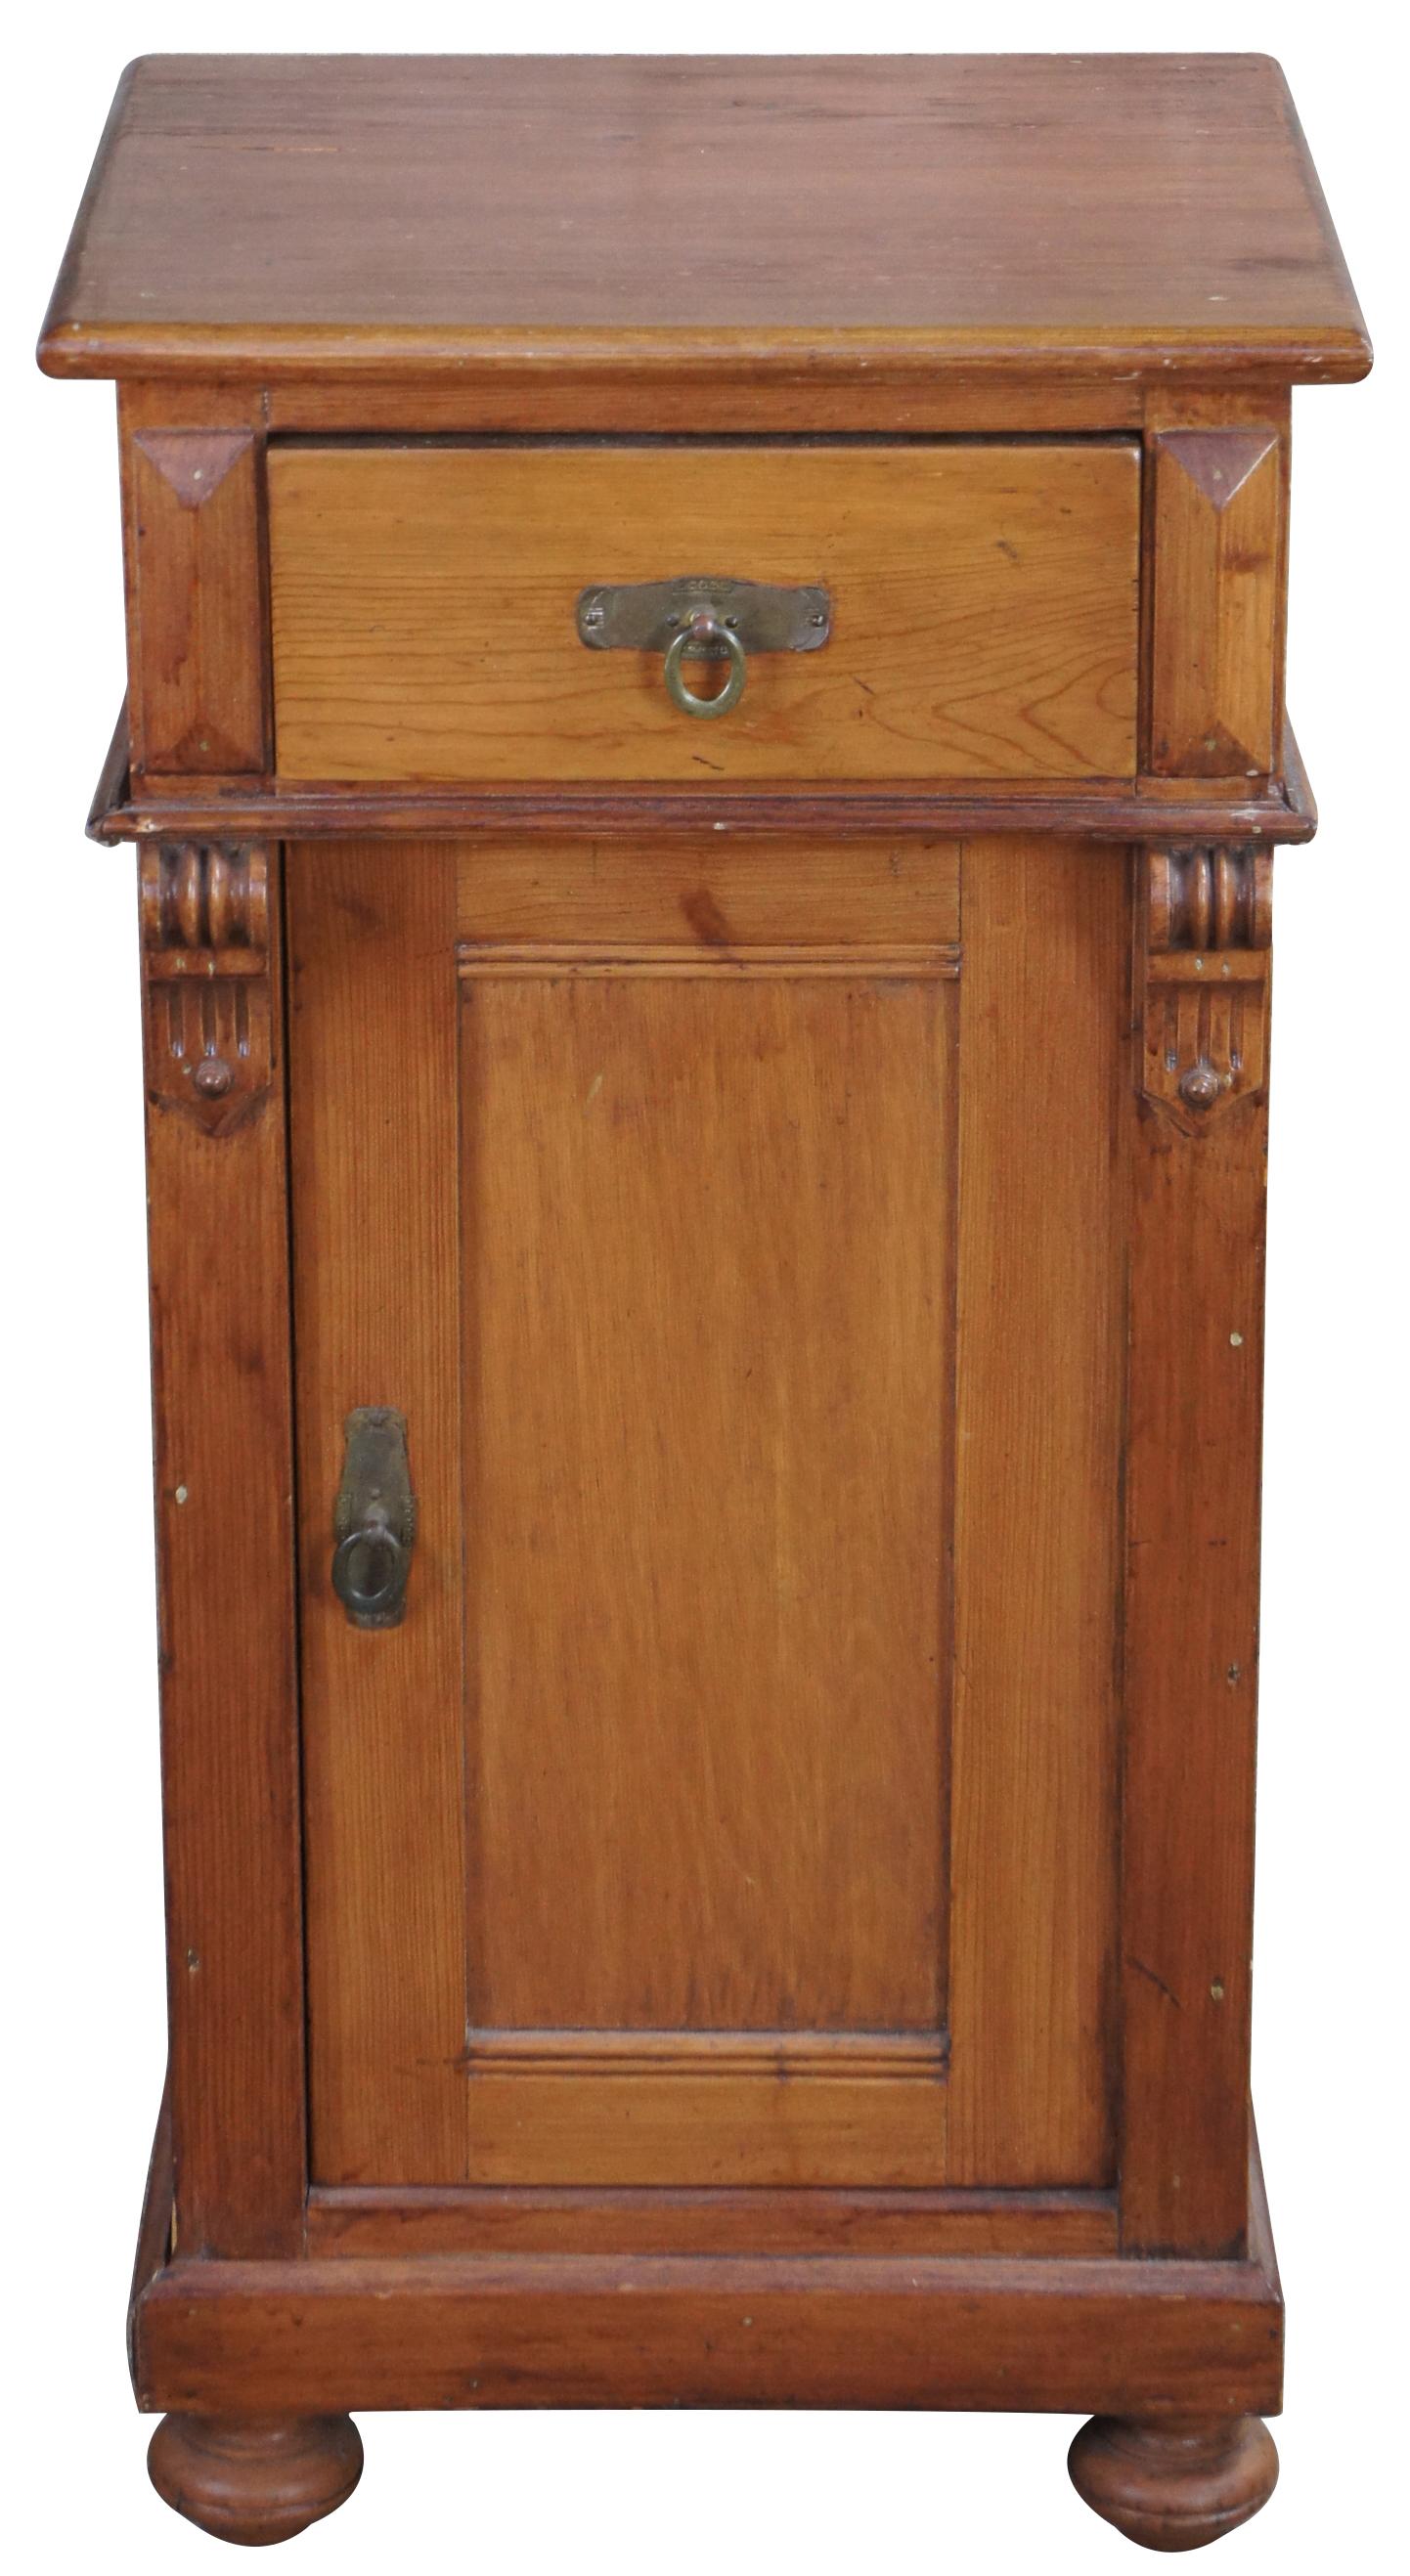 Late 20th century English pine cabinet. Features a square shaped case with upper dovetailed drawer, lower cabinet, scrolled corbels and bun feet. Measure: 32